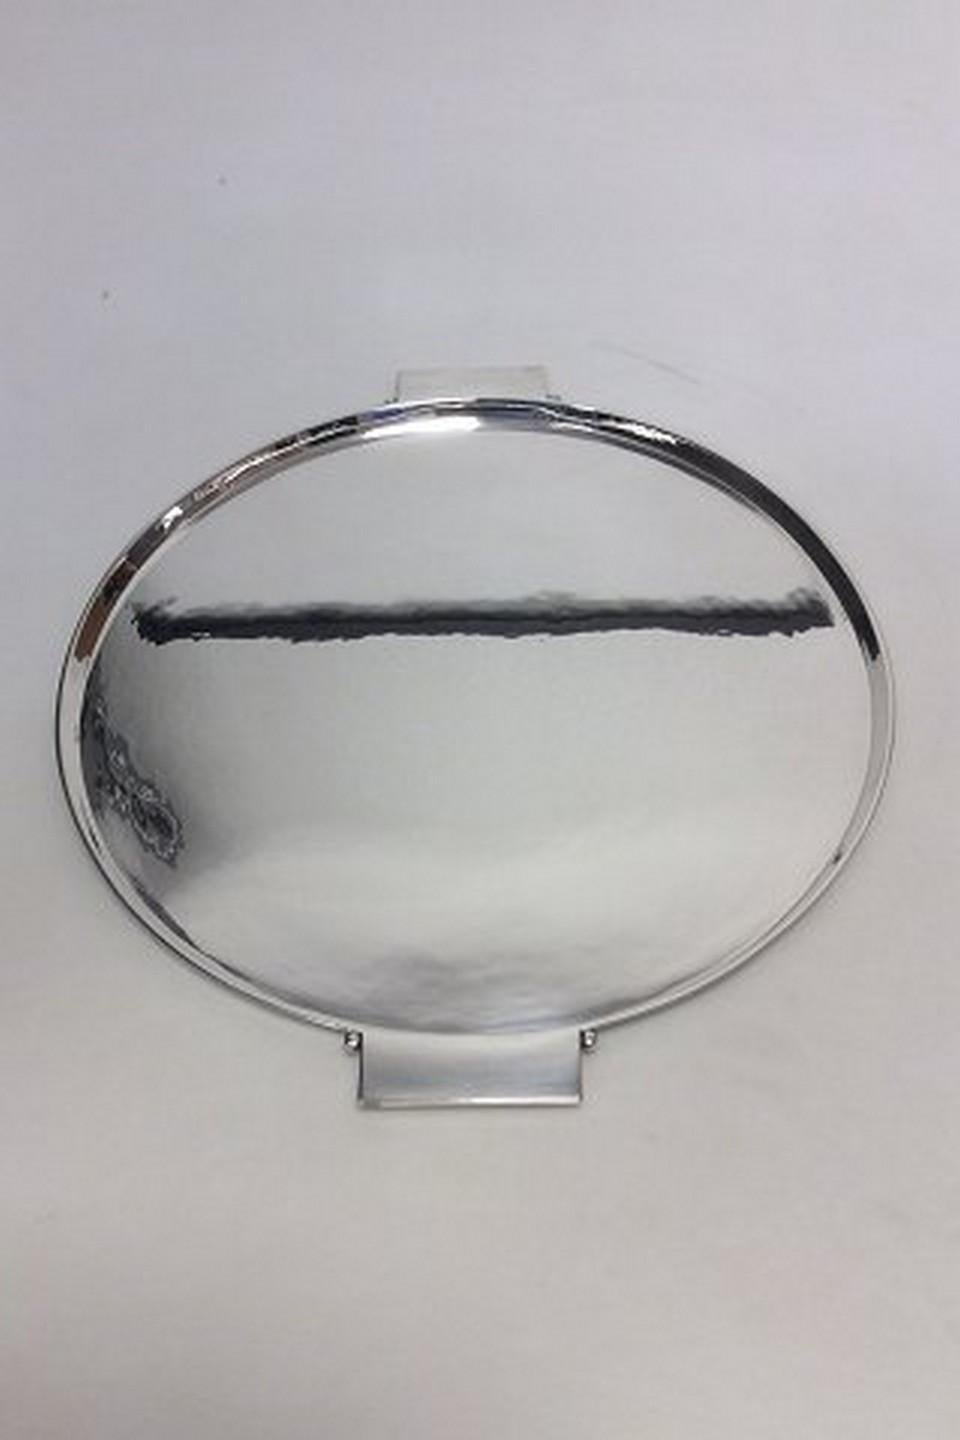 Georg Jensen sterling silver Art Deco tray by Johan Rohde no 529 A

Measures 43.2cm with handles and 38.5cm without (17